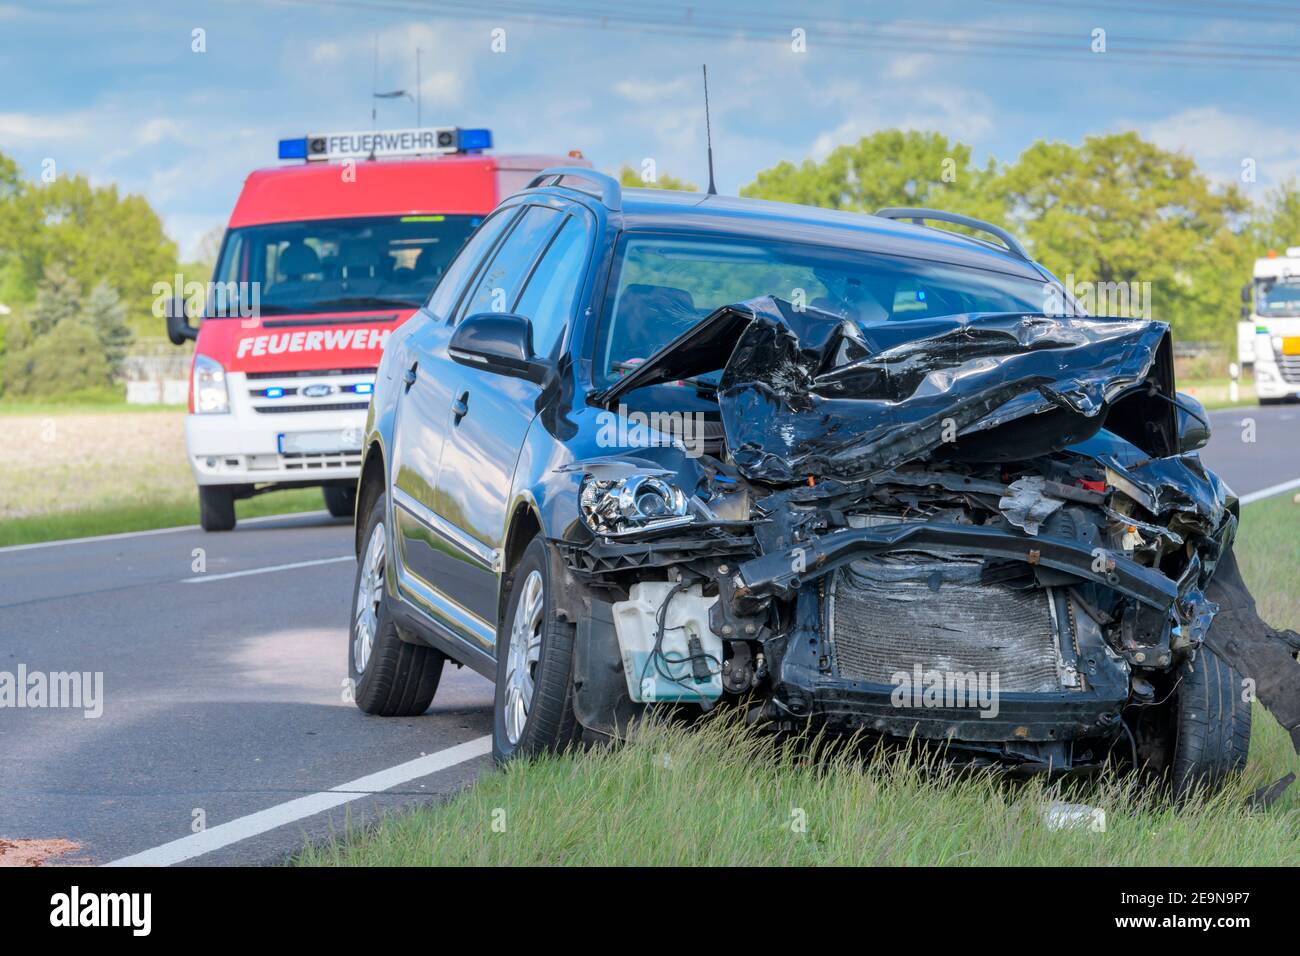 Accident scene after a serious accident on a country road Stock Photo